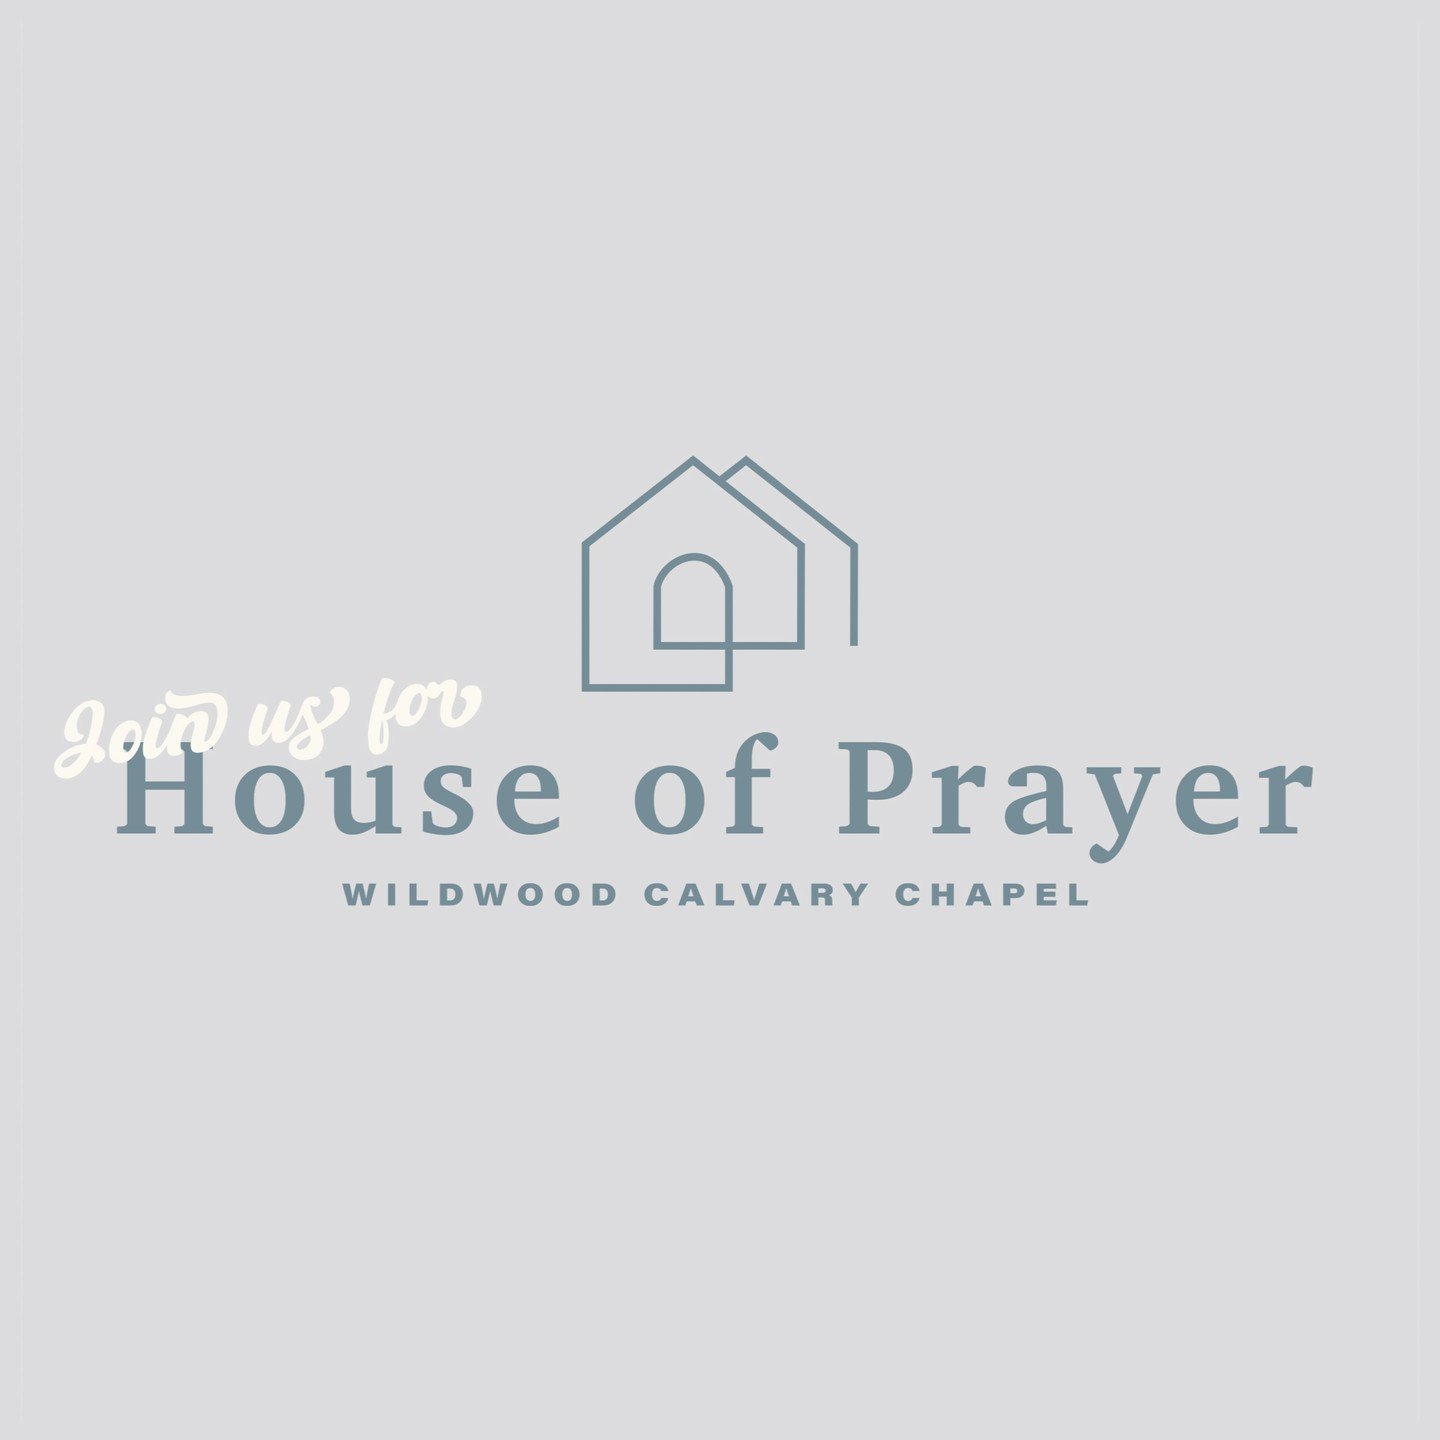 Tonight is the first Wednesday of the month, which means... House of Prayer! We will meet in the Student Ministry Building beforehand and go to the Worship Center together. We hope that you can join us!